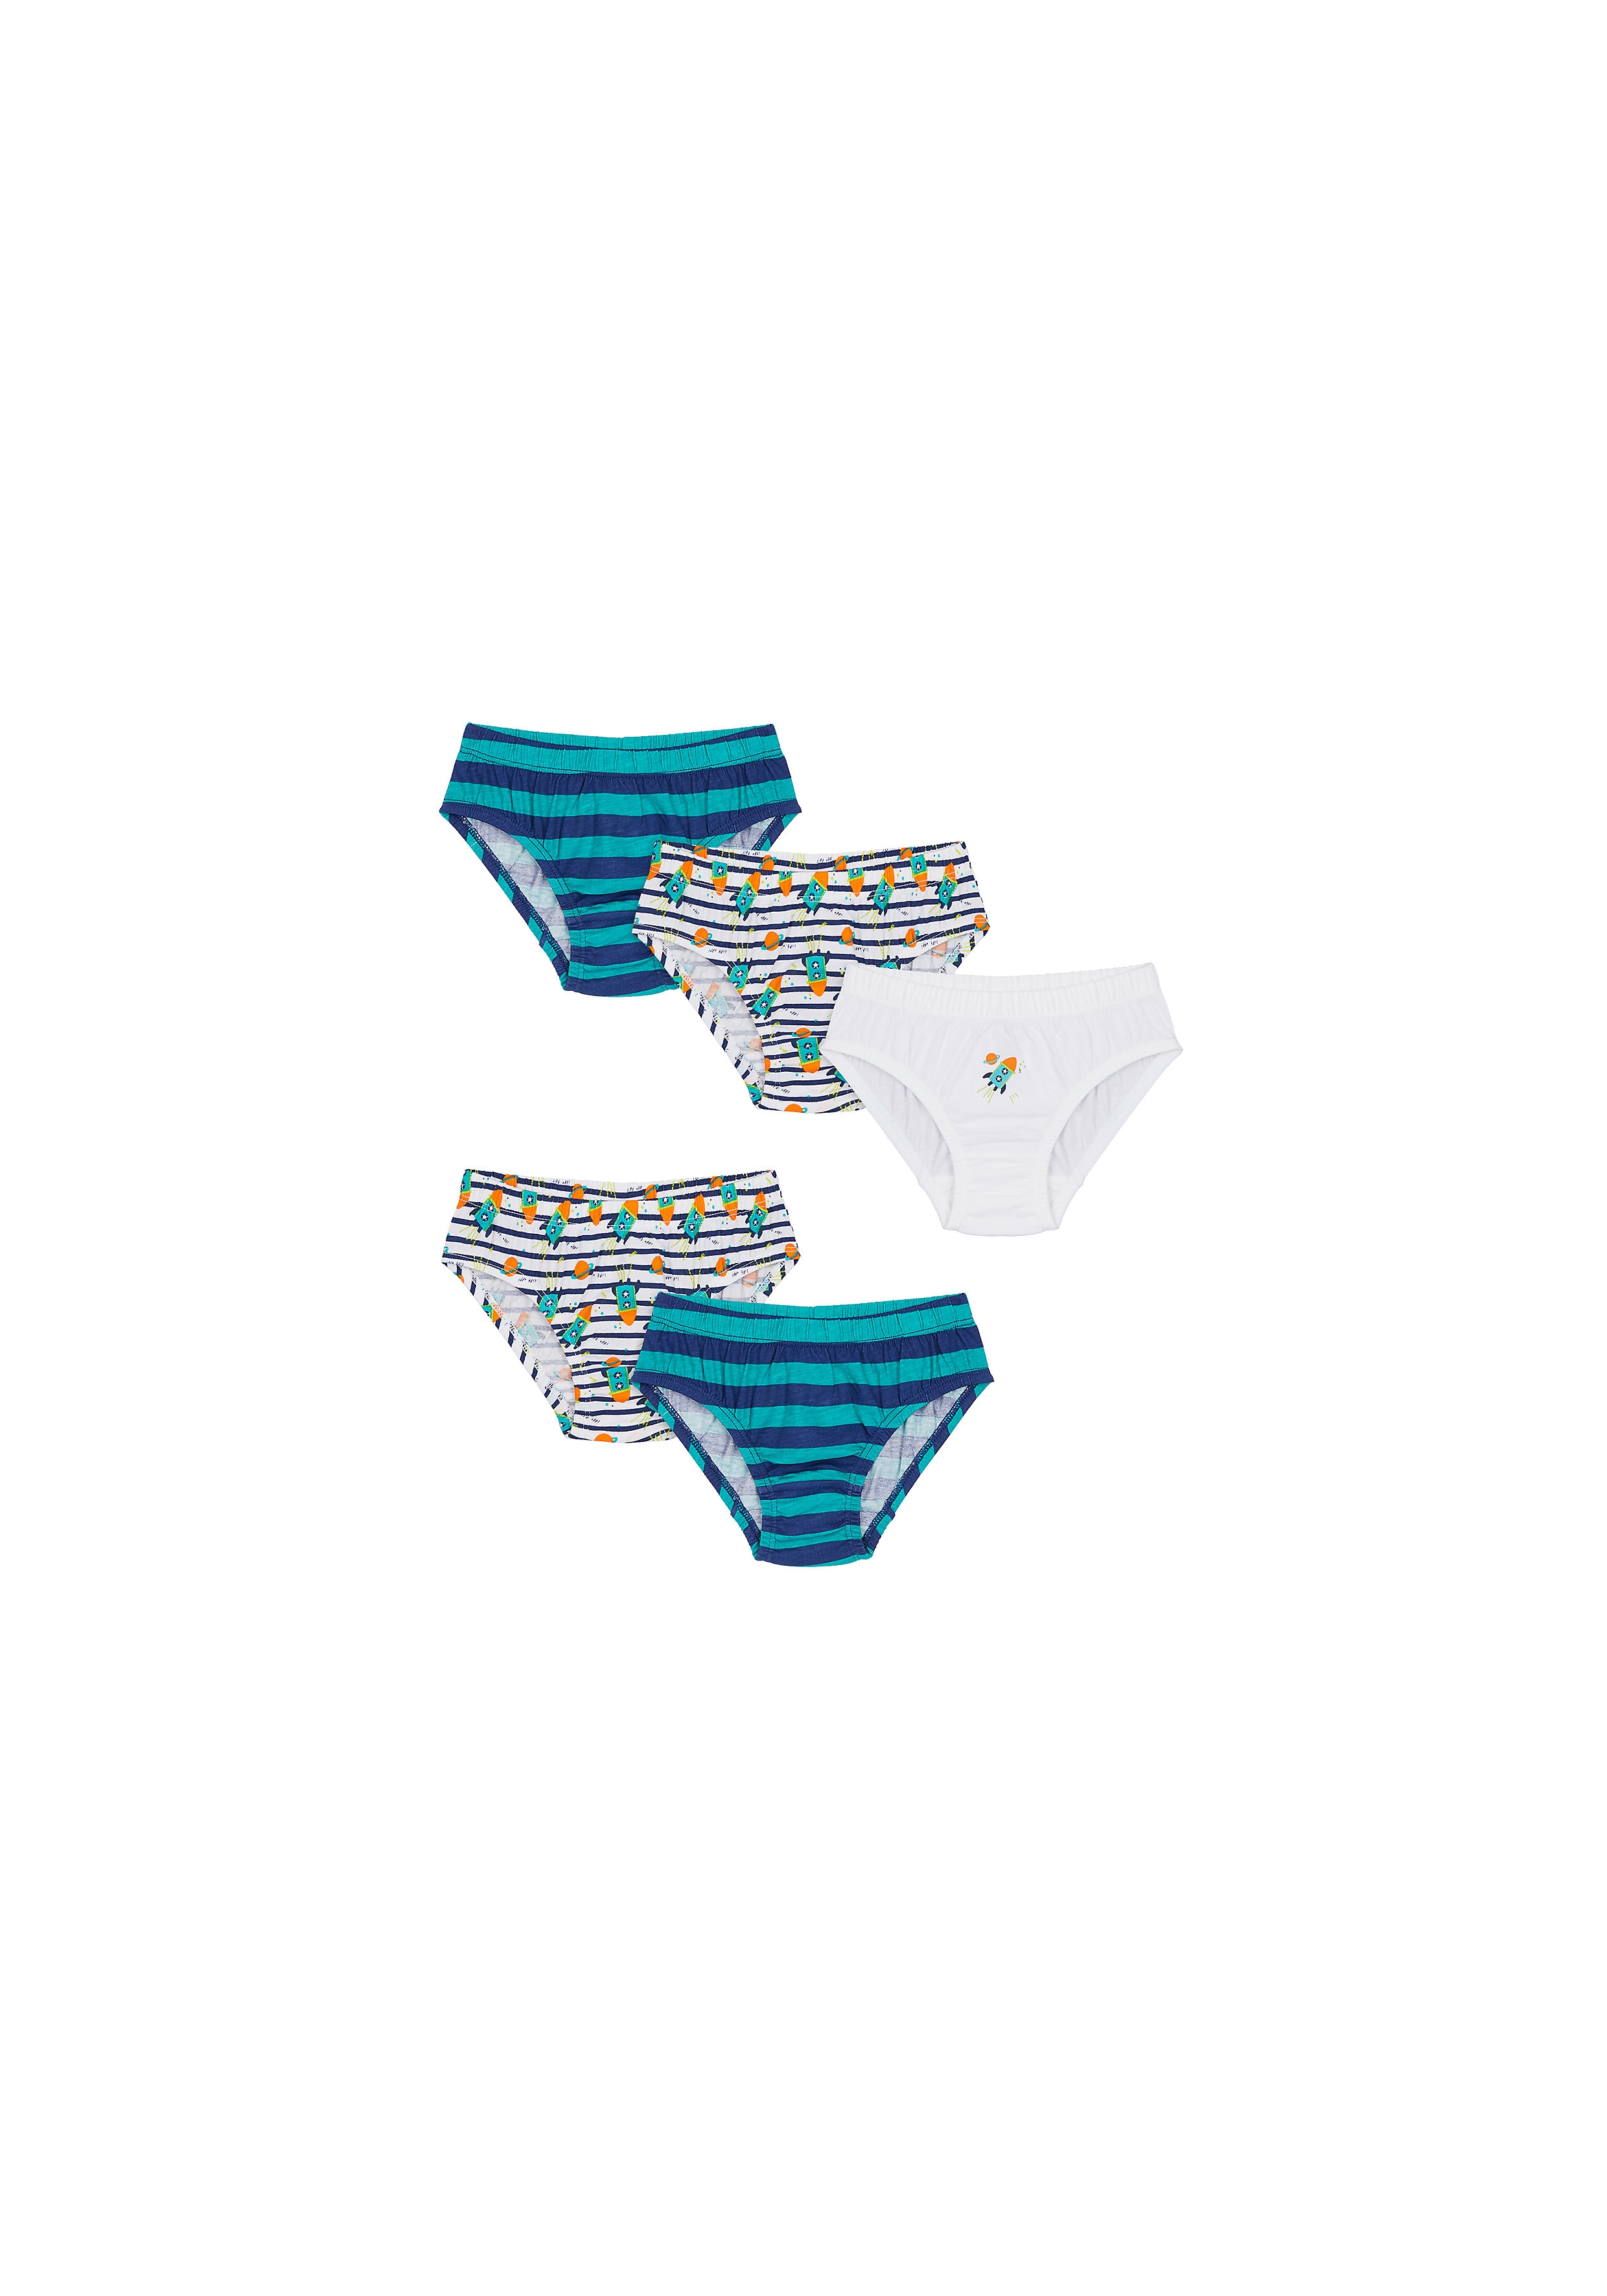 Mothercare | Boys Briefs Striped And Rocket Print - Pack Of 5 - Multicolor 0